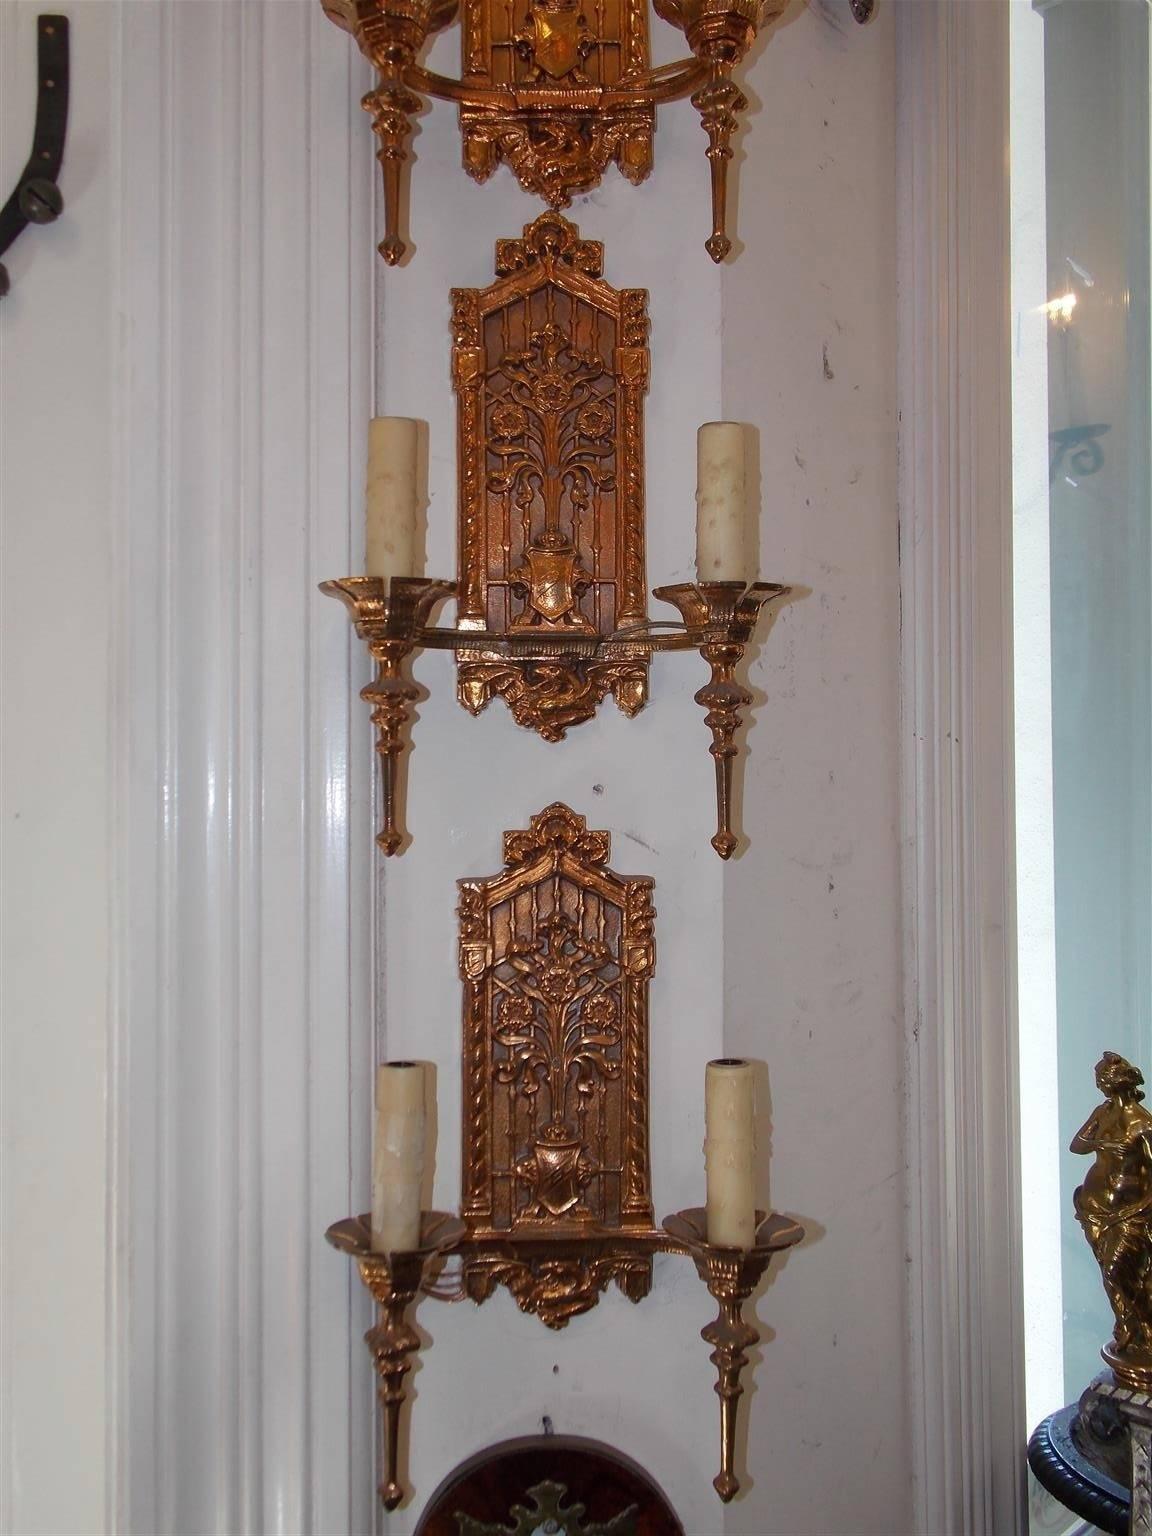 Set of six English two-arm bronze sconces with foliage paladin cornices , centered floral coat of arms, fluted bobeches with tampered spheres, and terminating with a lower centered decorative winged gargoyle, Early to Mid-19th century. Sconces were